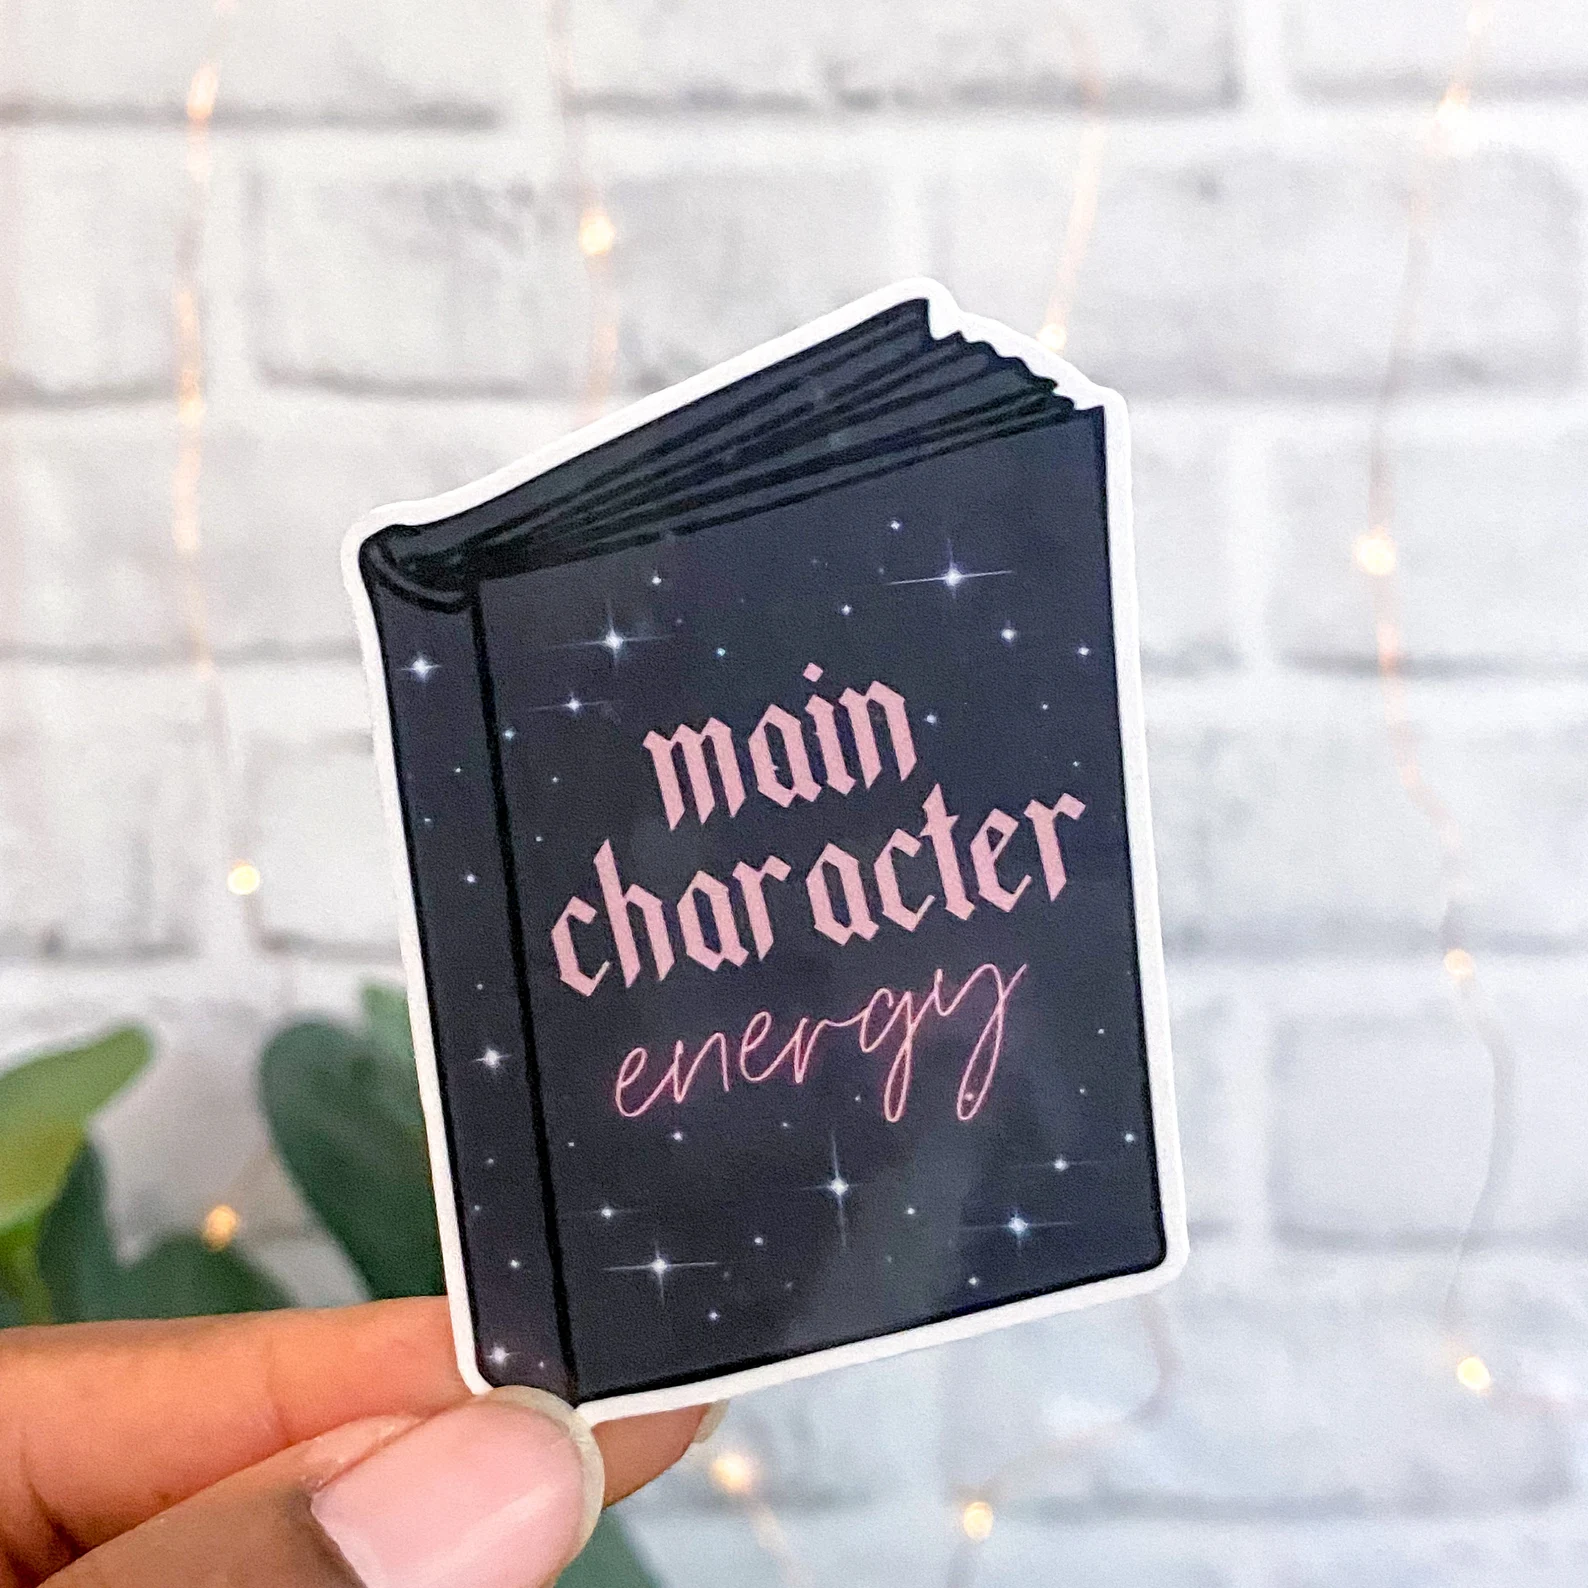 Image of a black book sticker with pink text that says "main character energy."